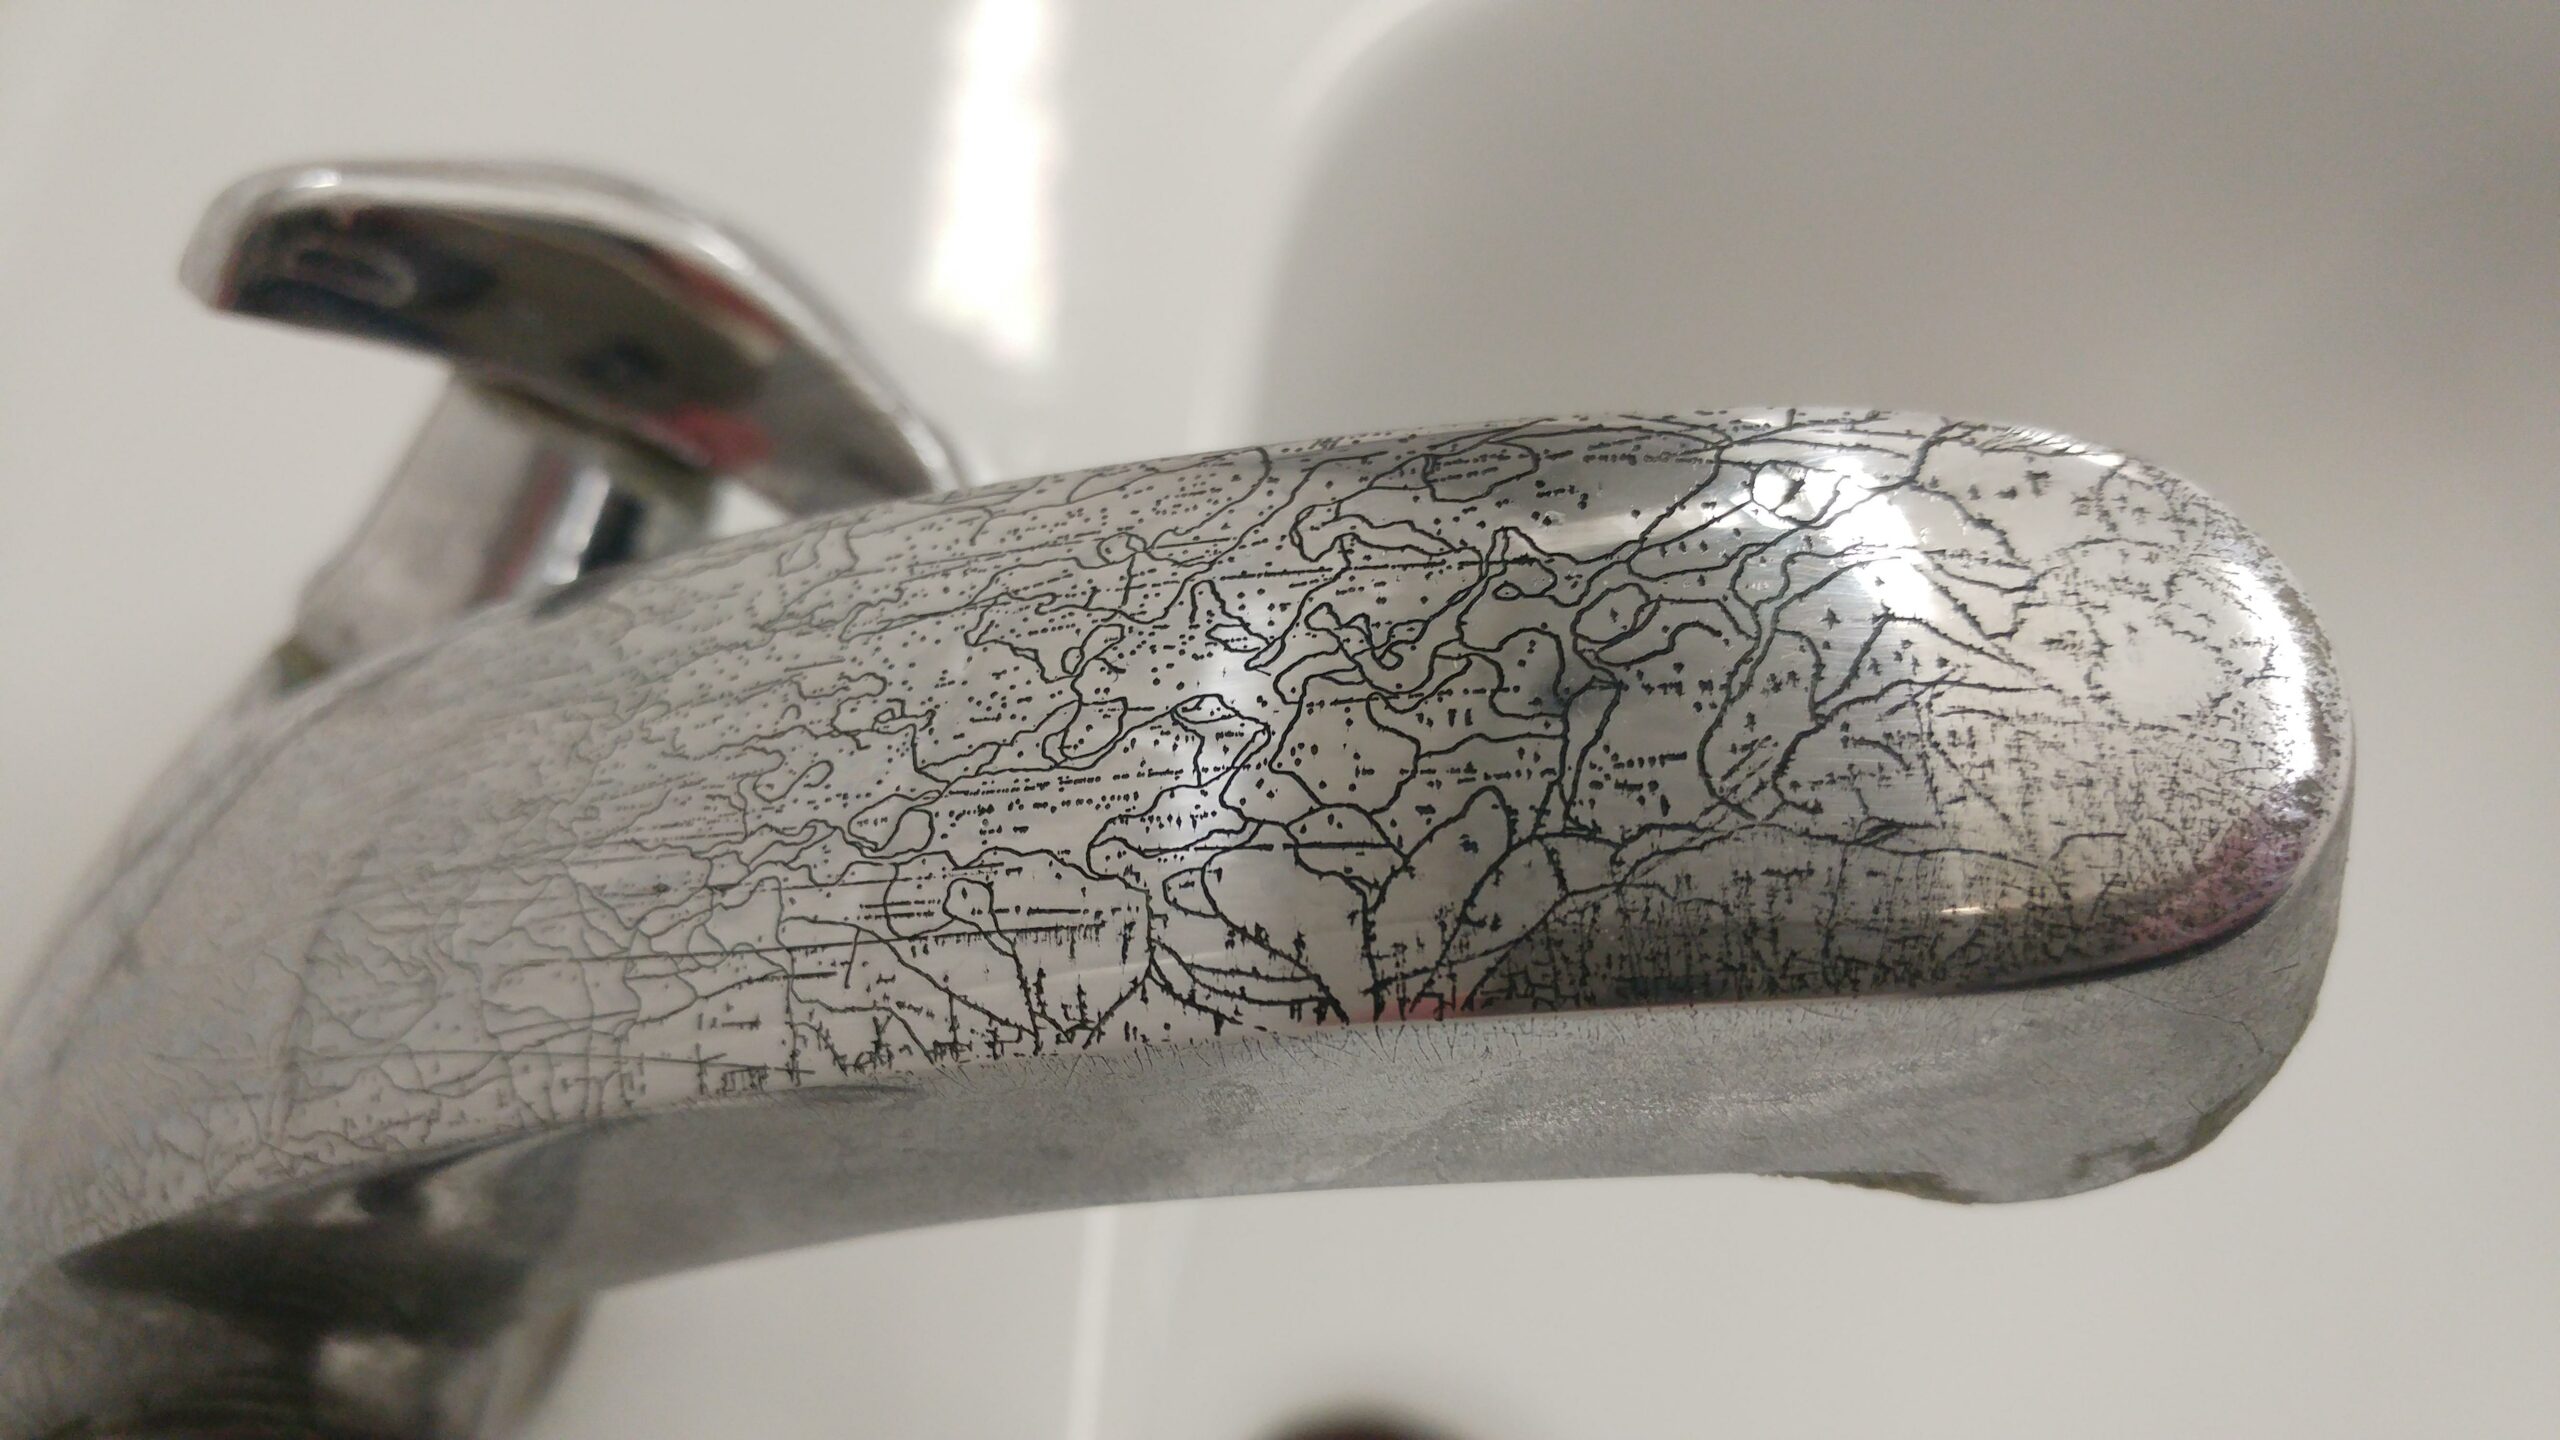 corrosion on a faucet that looks like a map